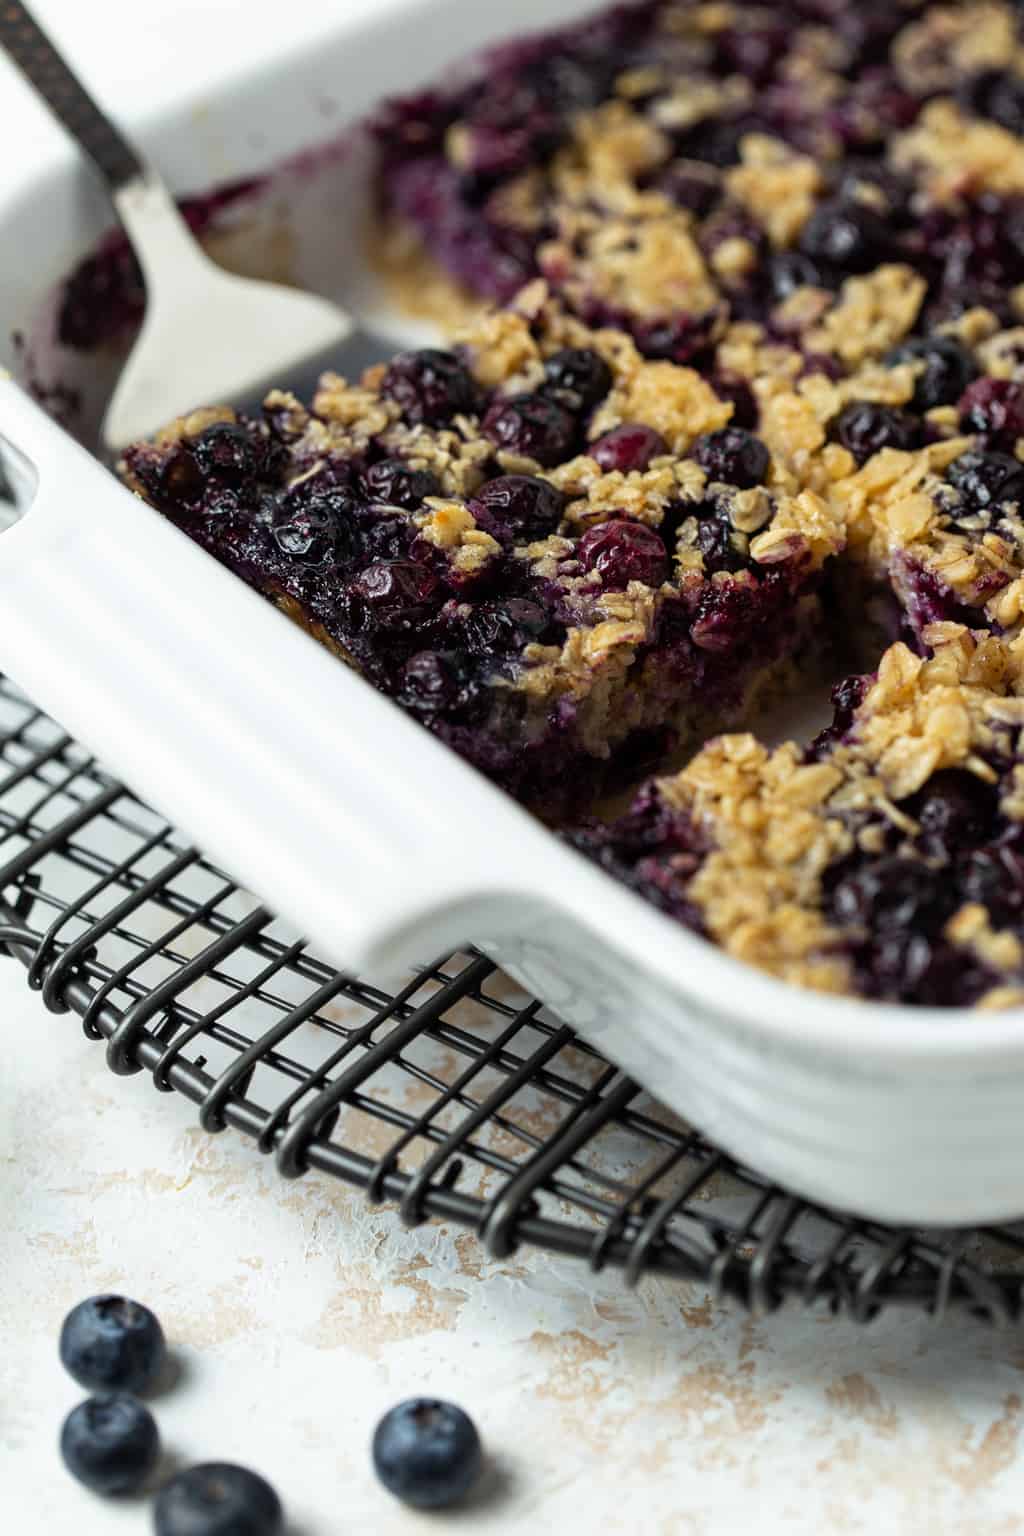 Baked oatmeal in baking dish.